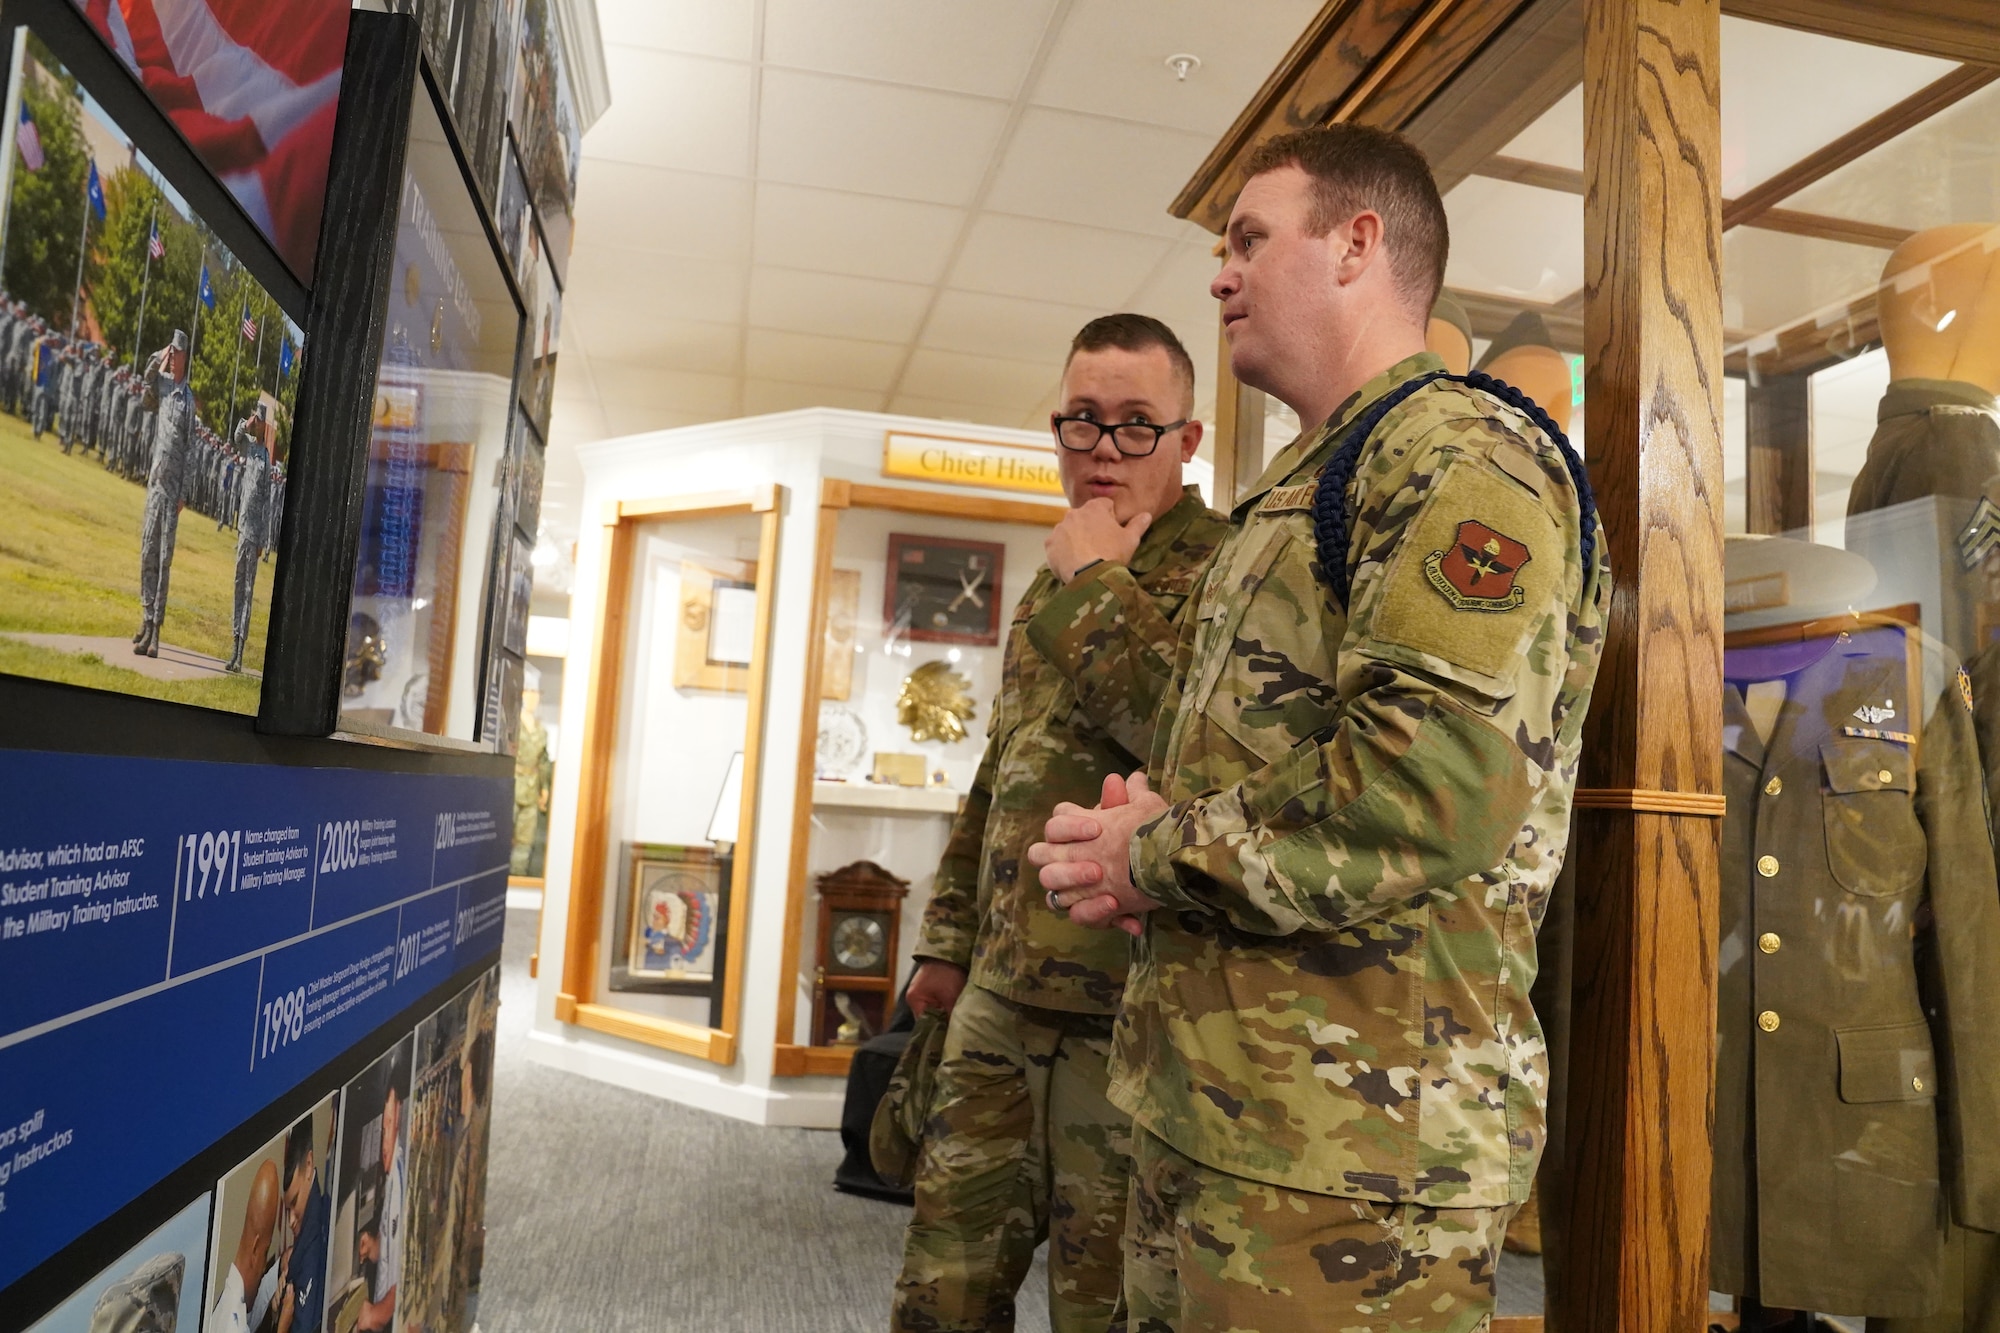 Military training leaders review the brand-new MTL wall at the Air Force Enlisted Heritage Hall at Maxwell Air Force Base Gunter Annex, Alabama, Oct. 30, 2019. MTLs play a vital role in the development of the next generation of Air Force leaders, warfighters, and protectors of freedom. The Air Force Enlisted Heritage Hall has dedicated a wall to highlight their lineage and contributions to the Air Force. (U.S Air Force photo by Airman 1st Class Spencer Tobler)